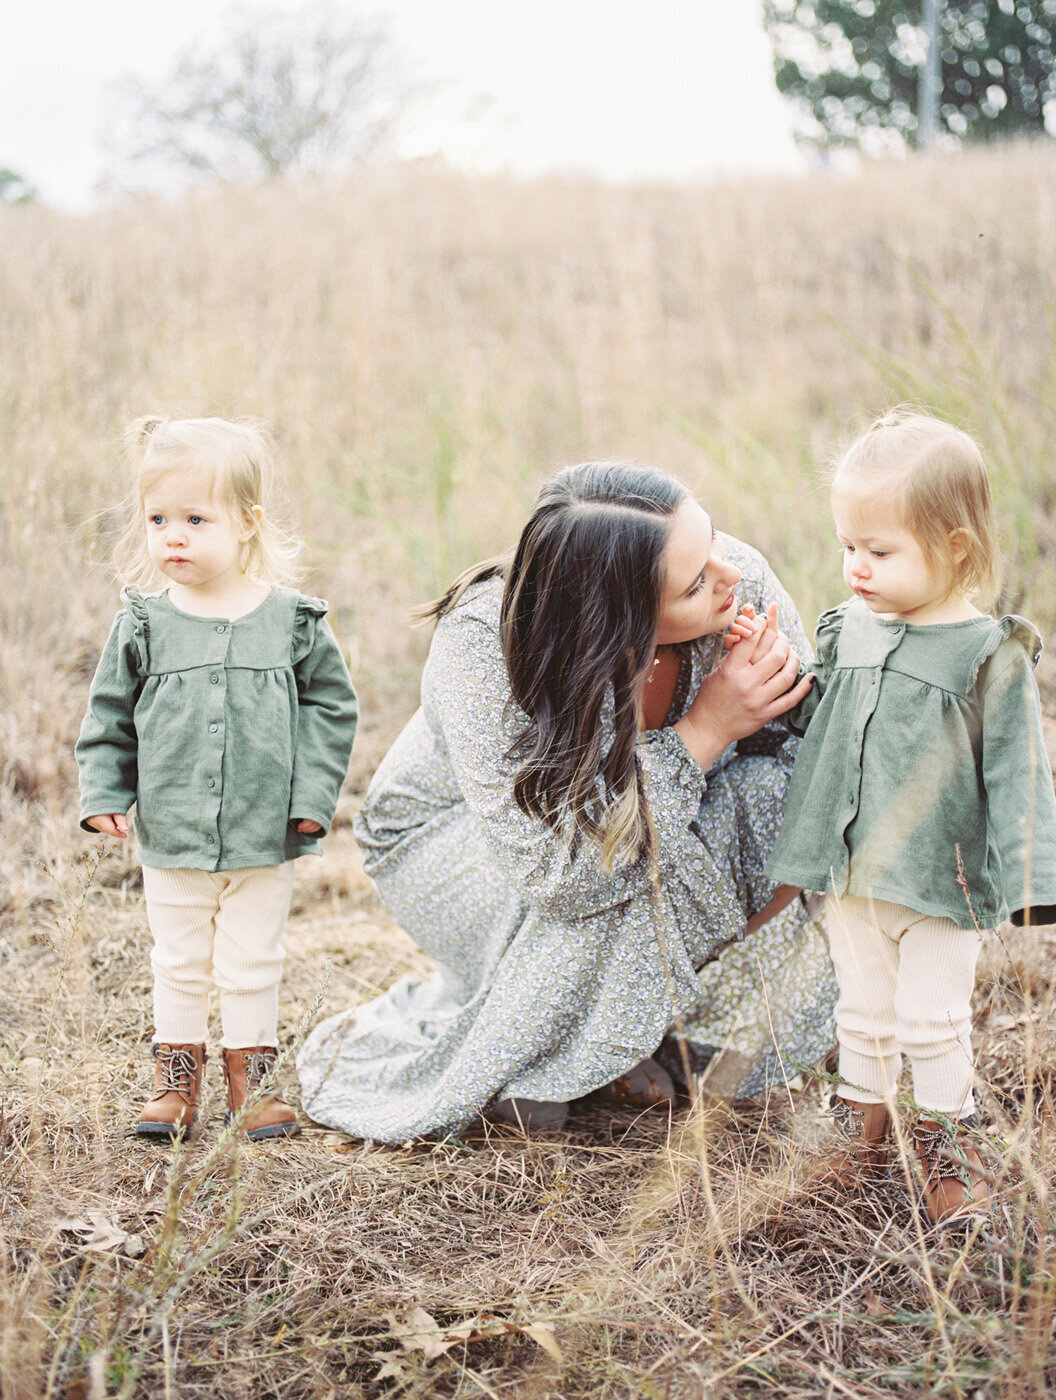 Raleigh Family Photographer | Jessica Agee Photography - 033